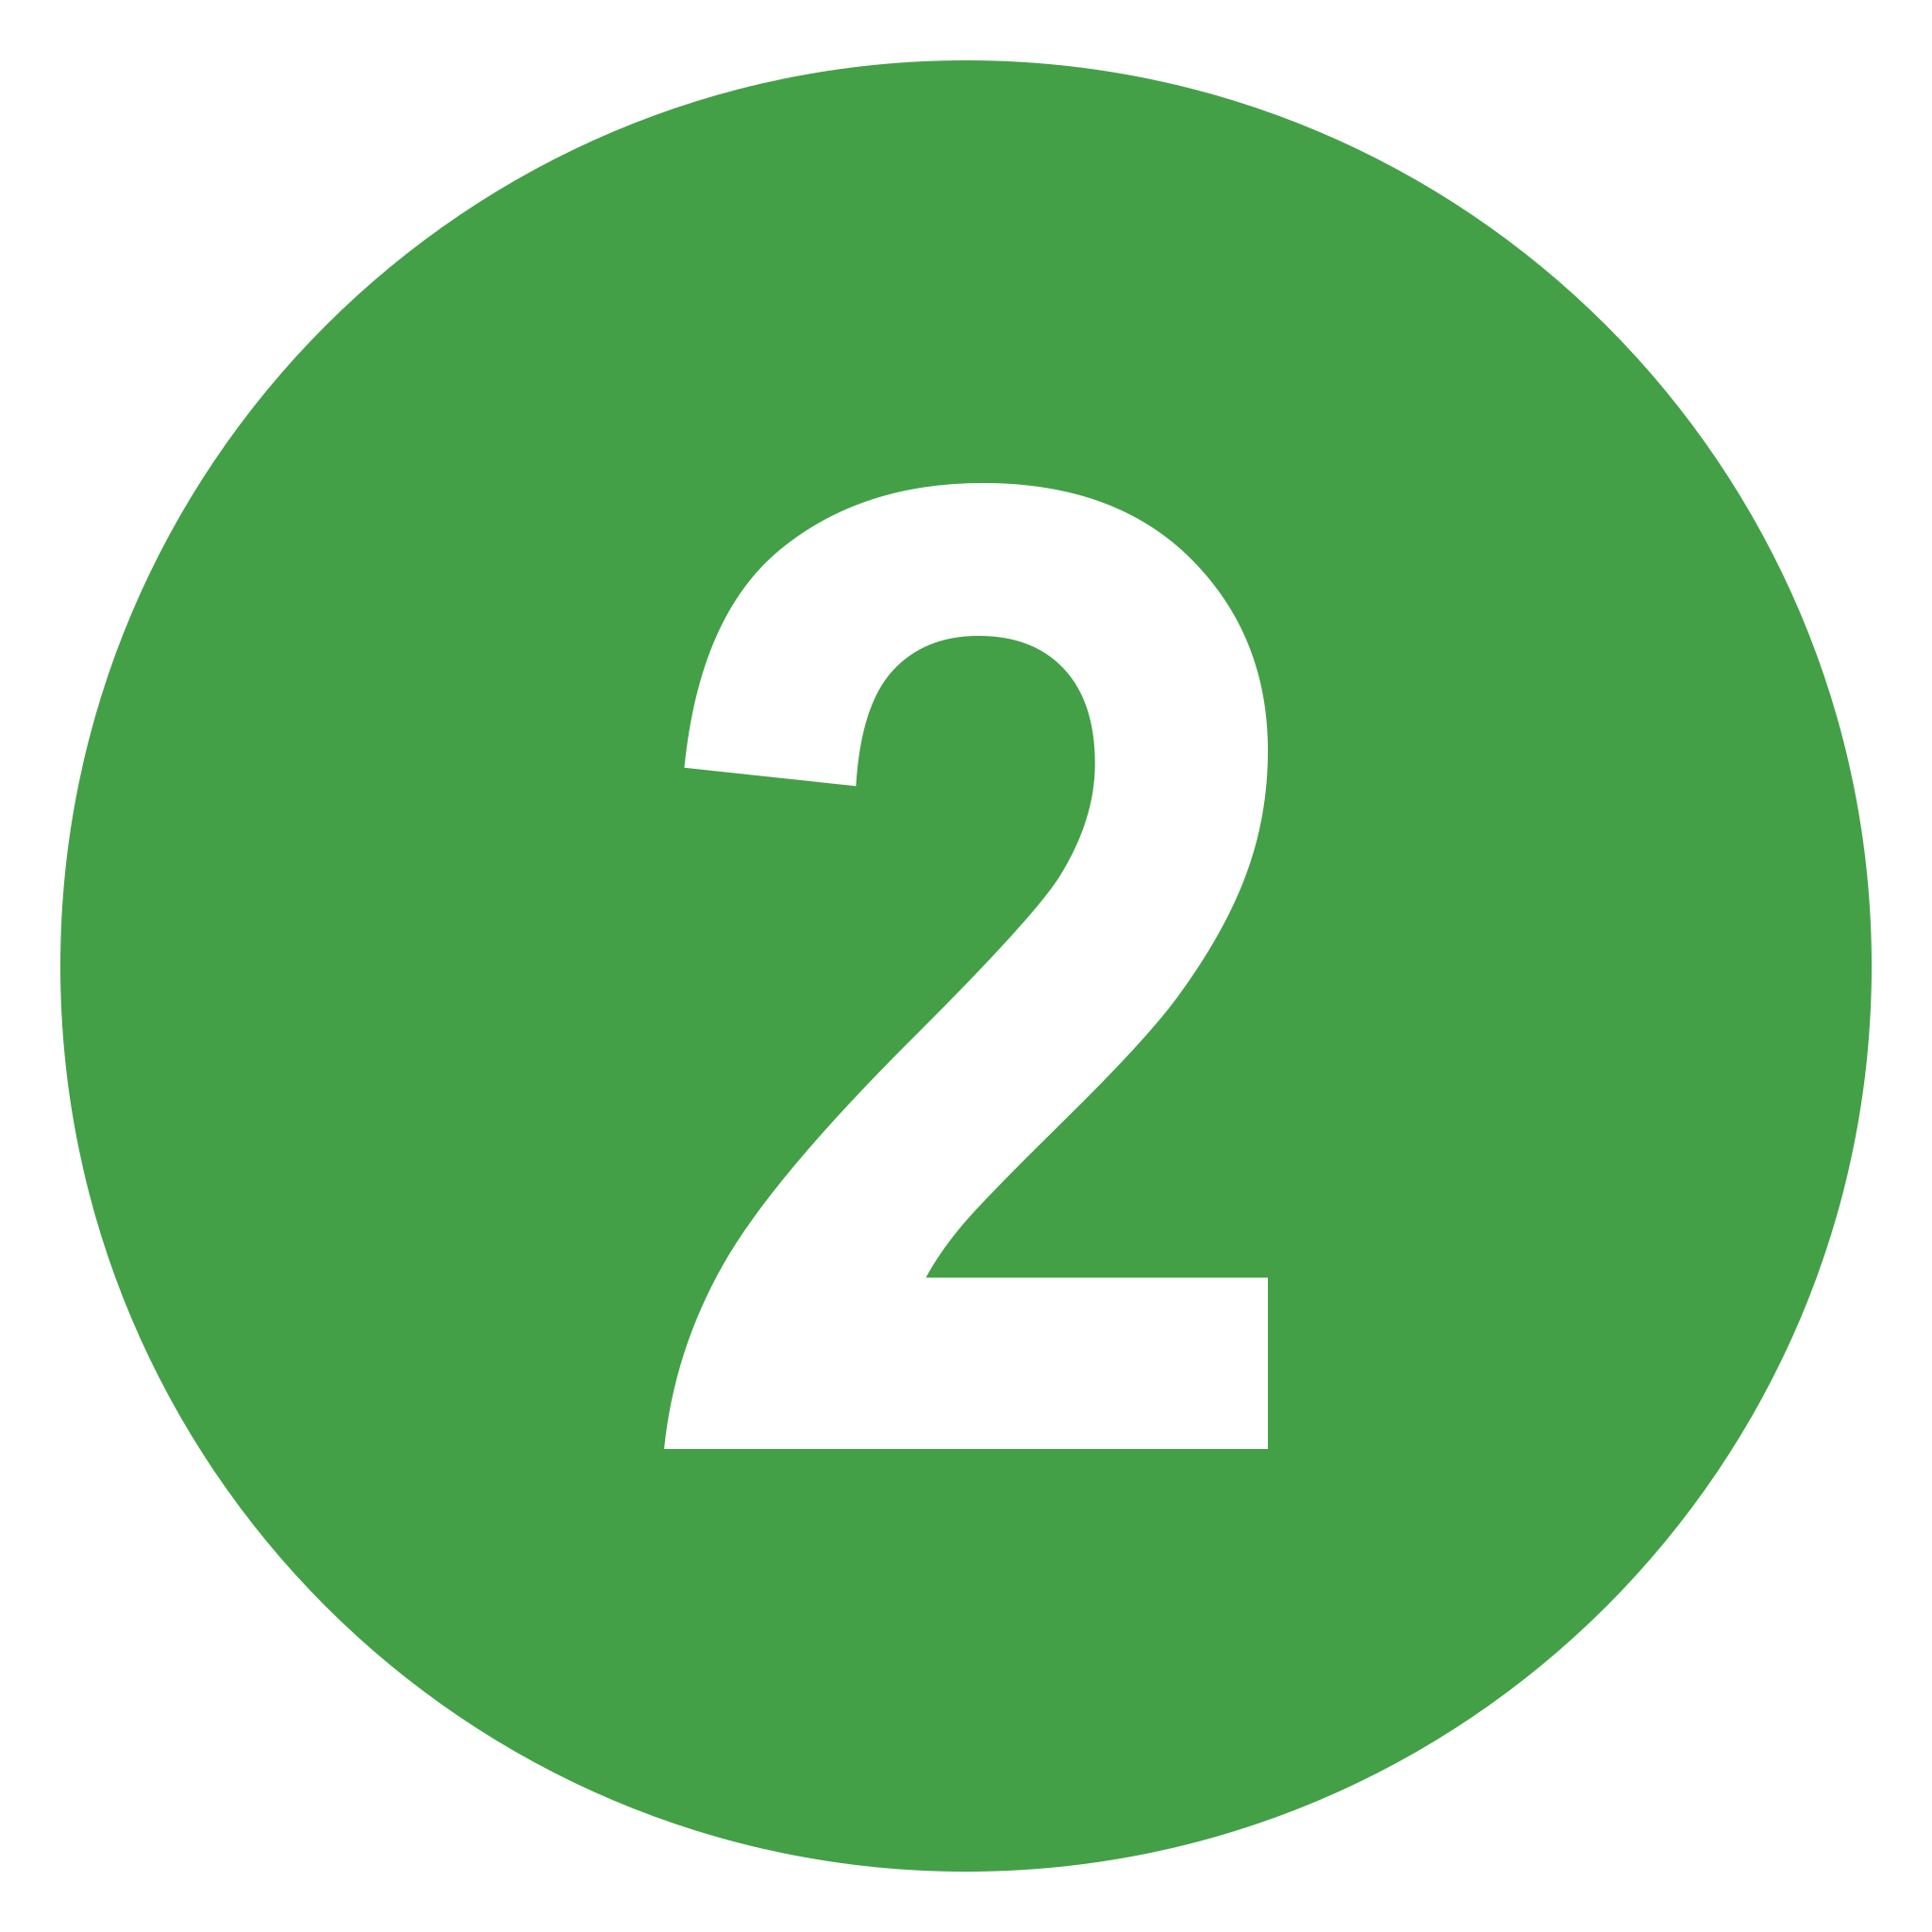 File:Eo circle green number-2.svg - Wikimedia Commons